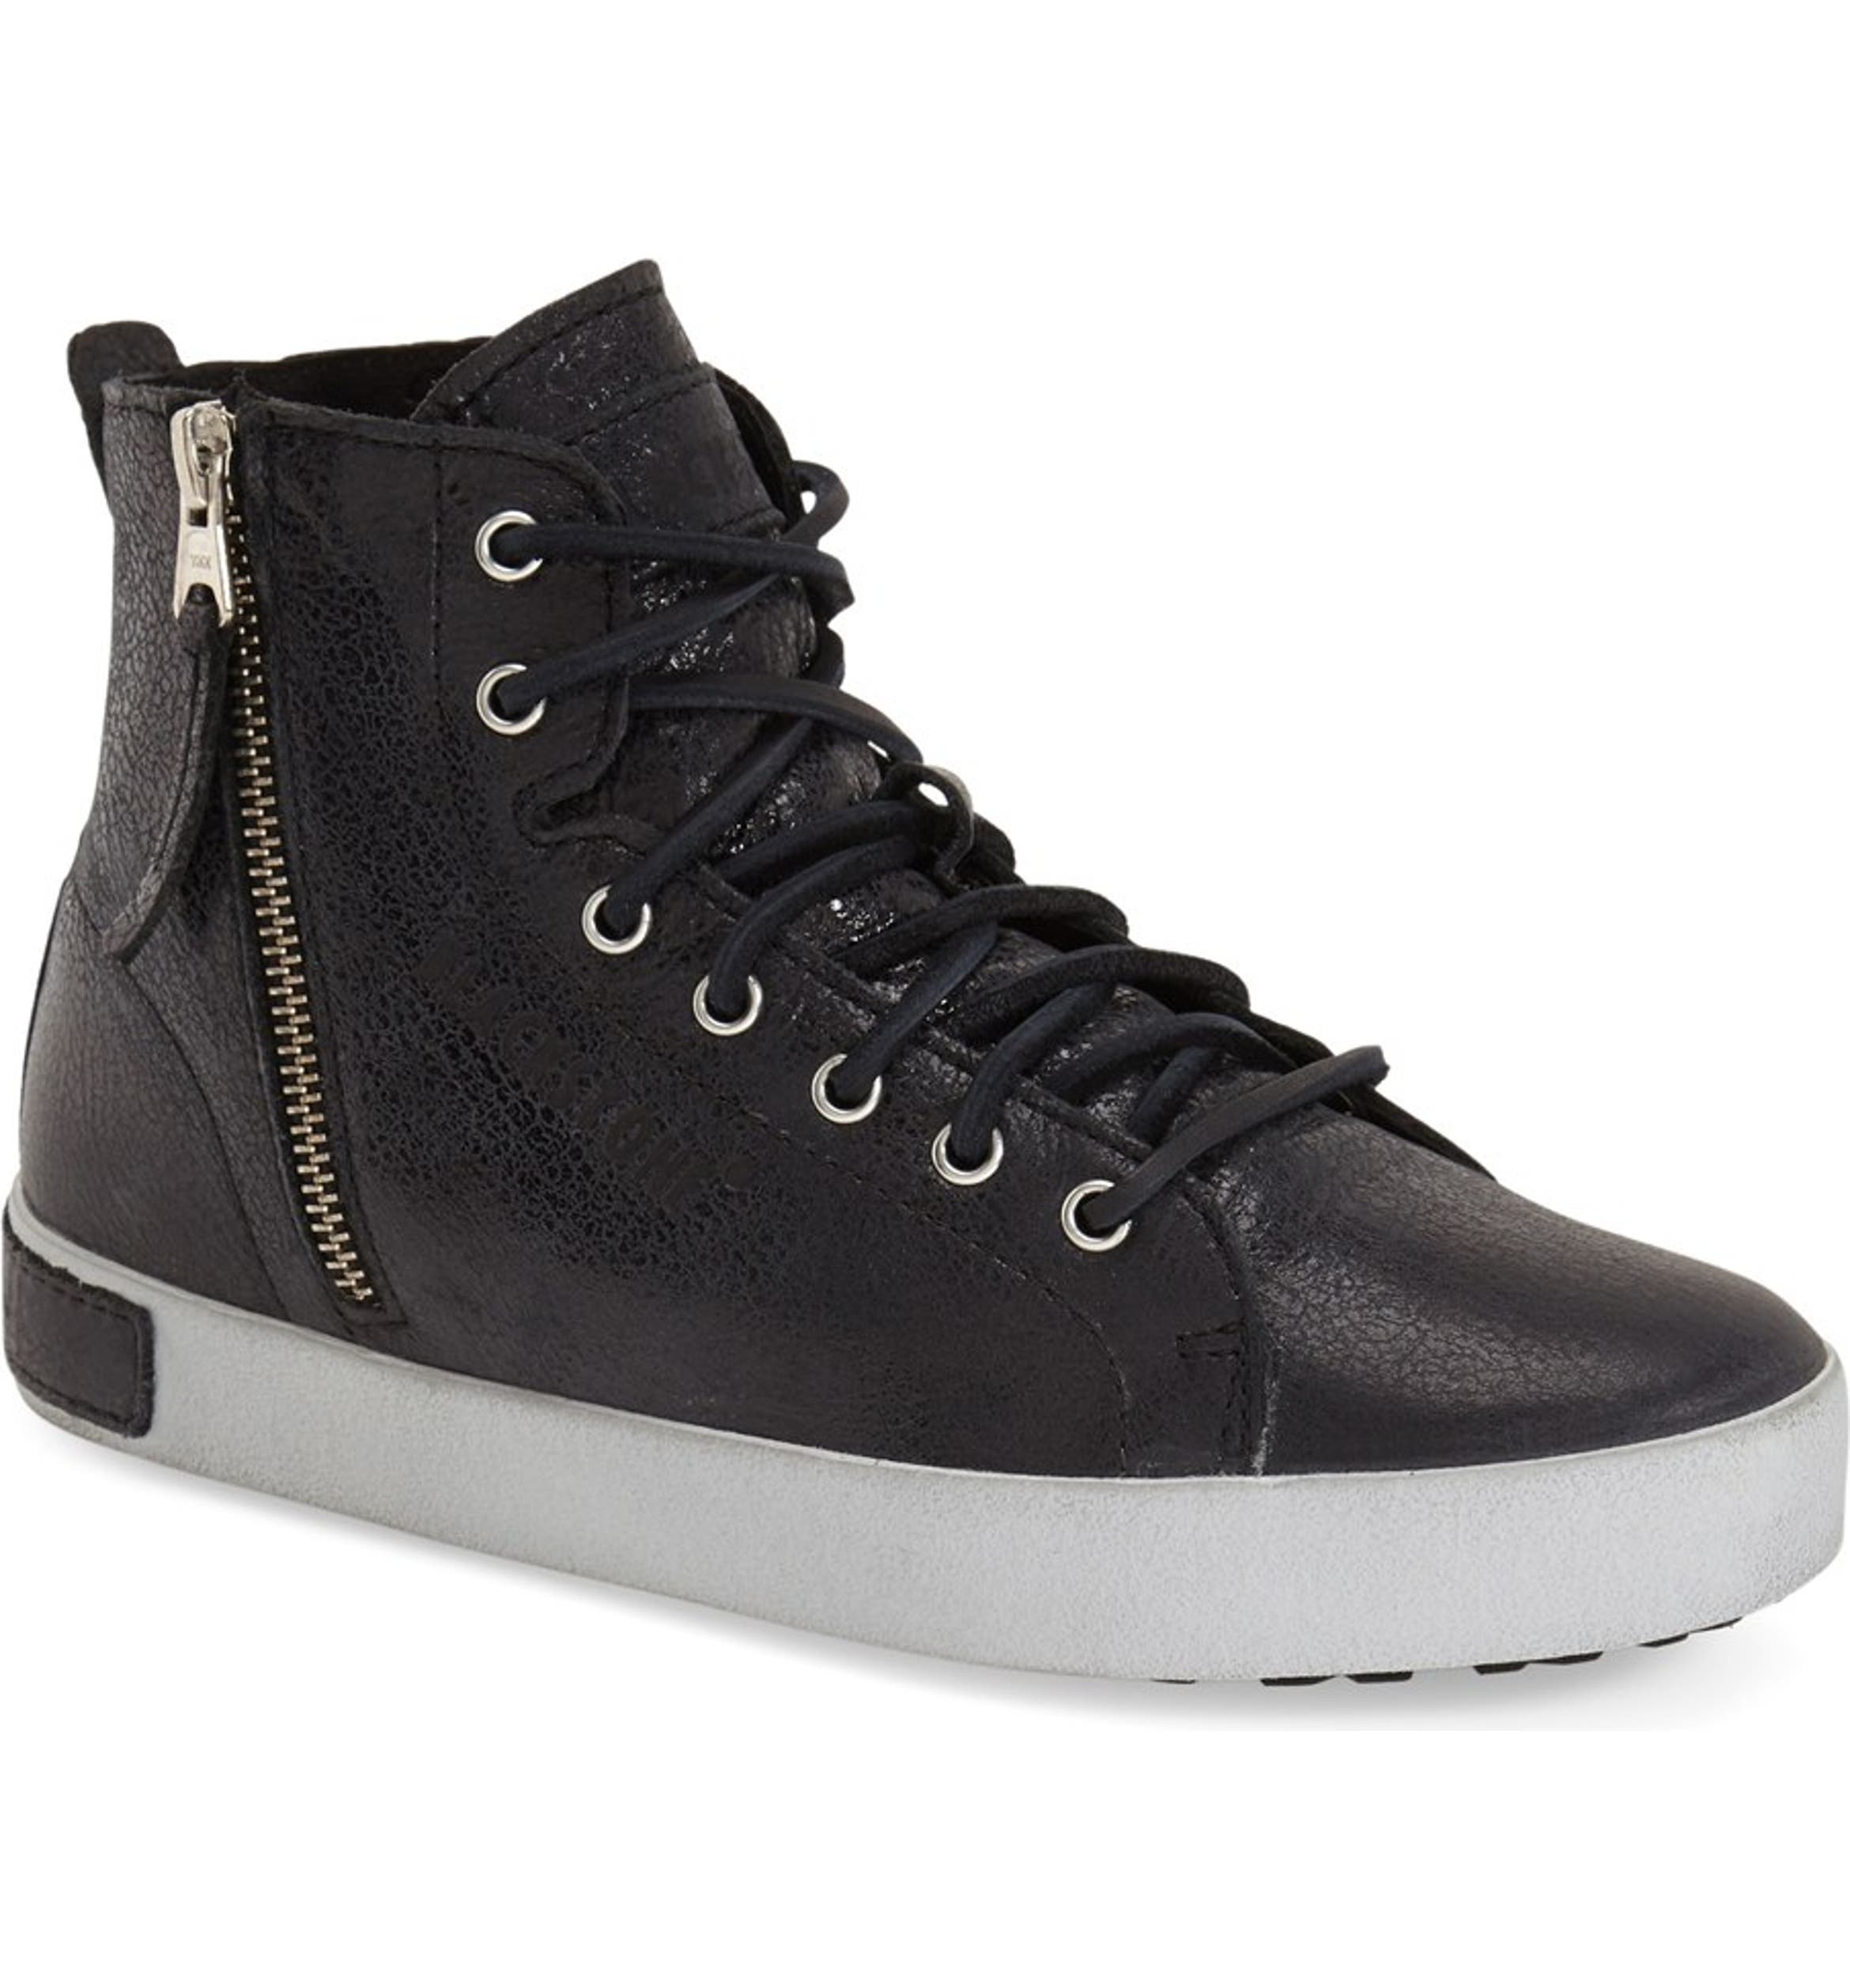 Blackstone 'KL62' High Top Sneaker with Genuine Shearling Lining ...